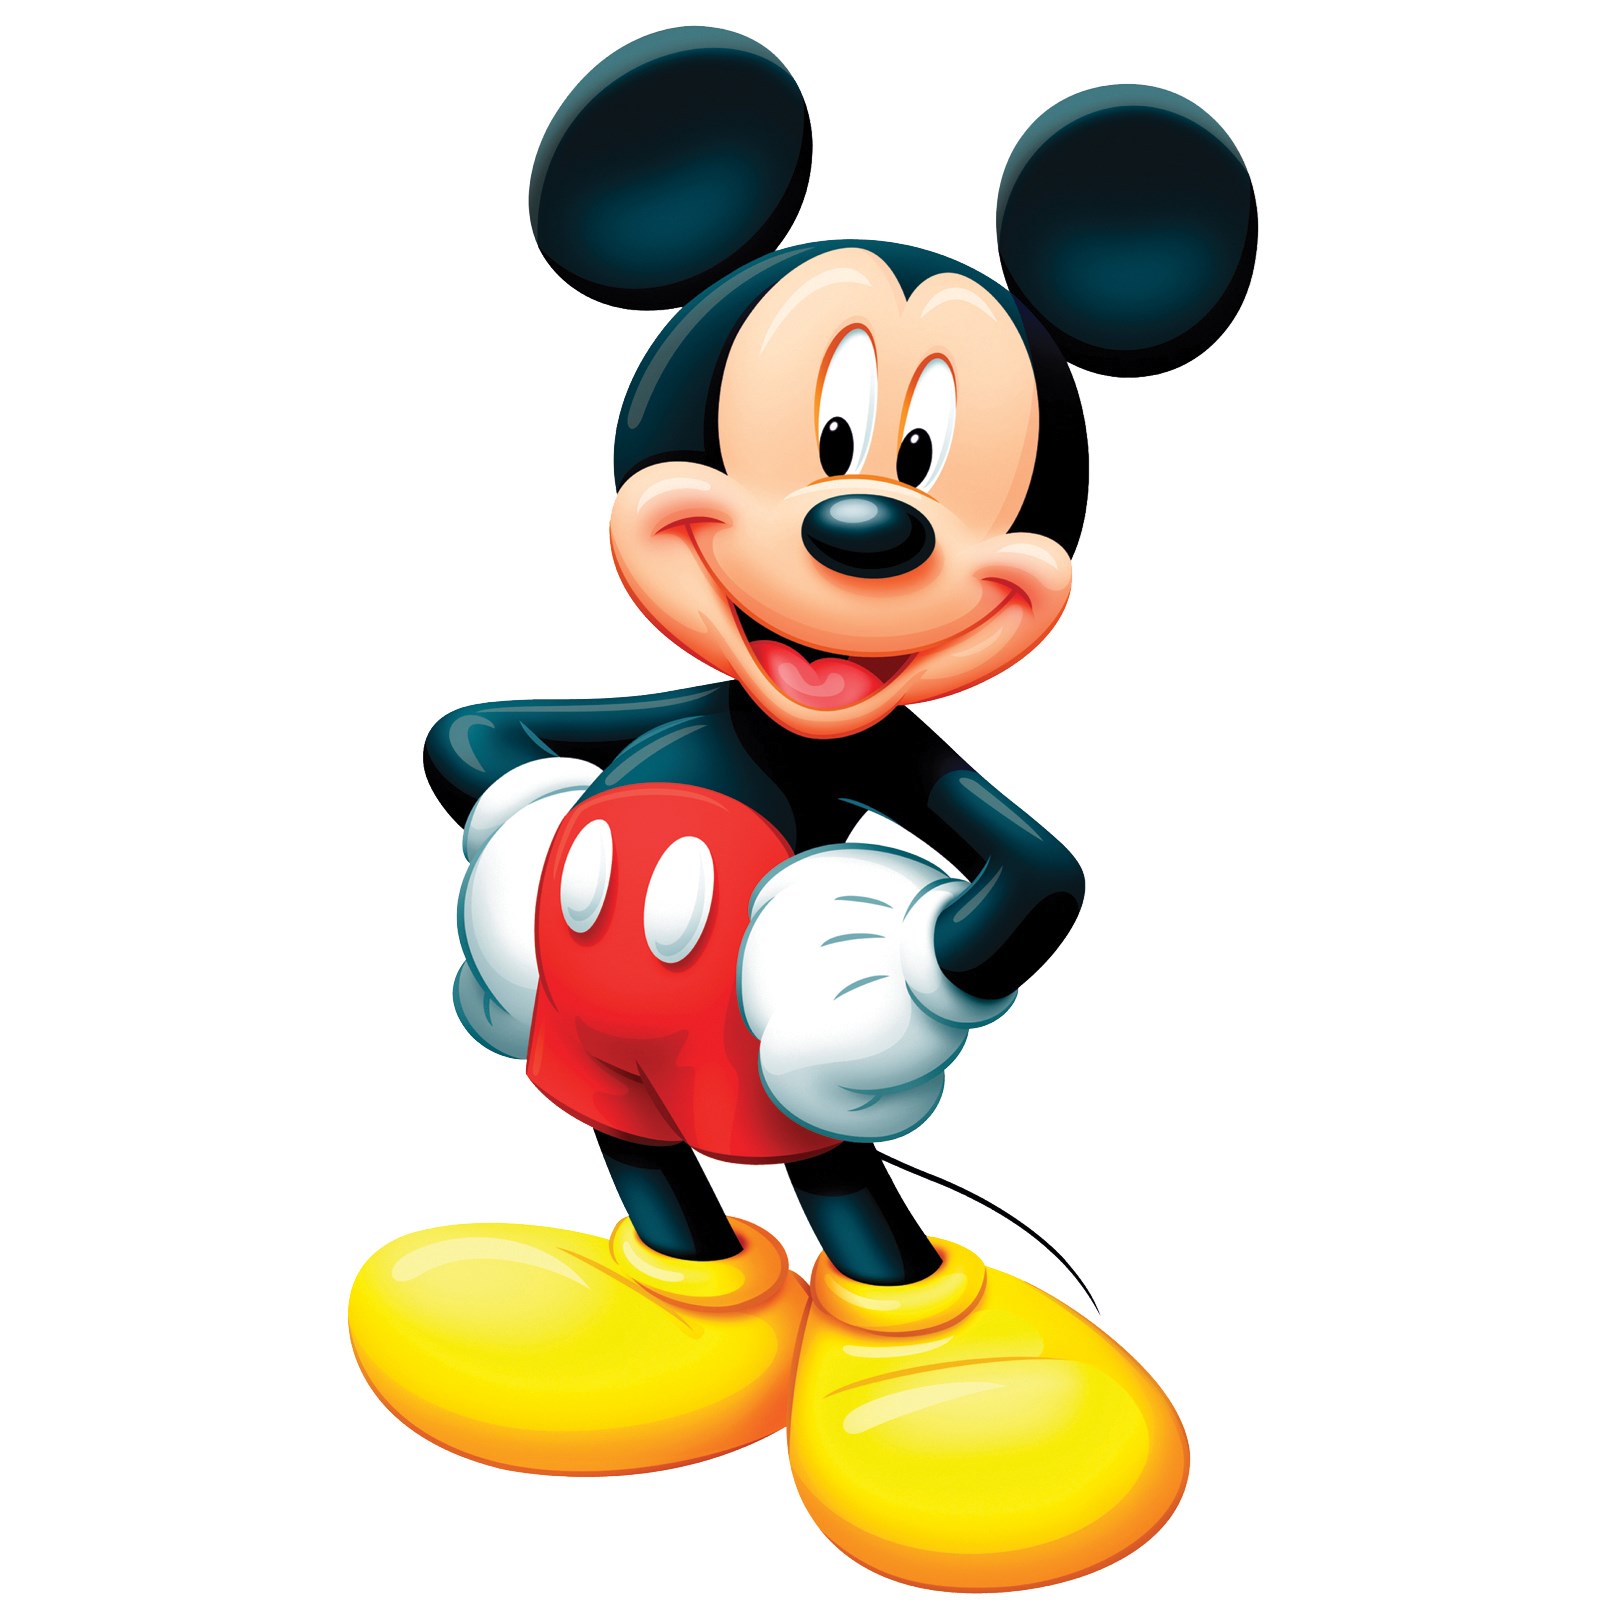 disney-mickey-mouse-standup-3-tall-bx-42